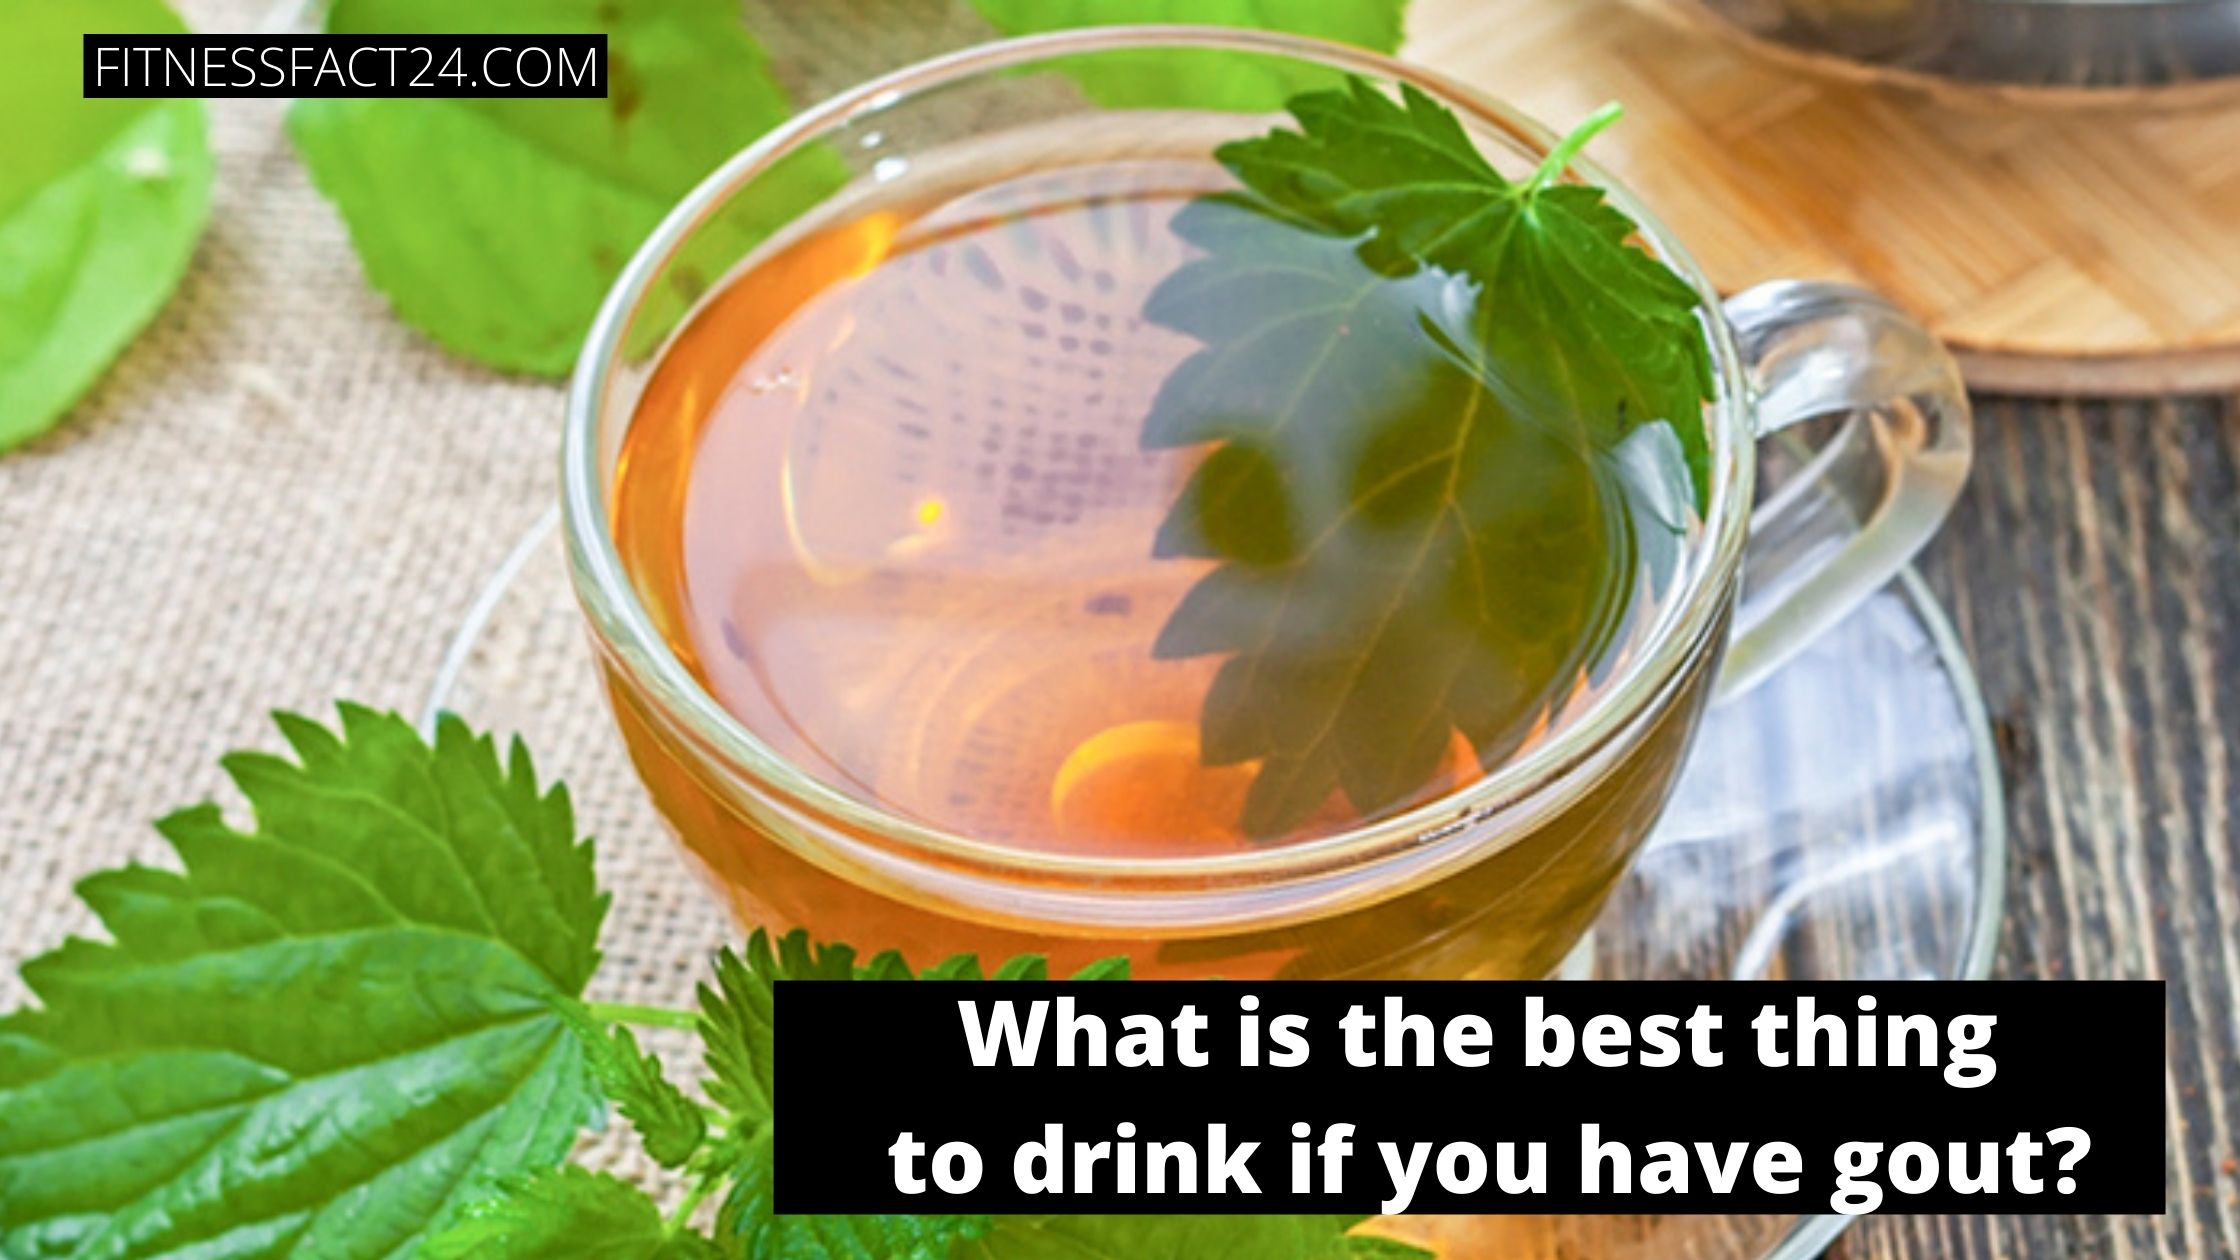 What is the best thing to drink if you have gout?